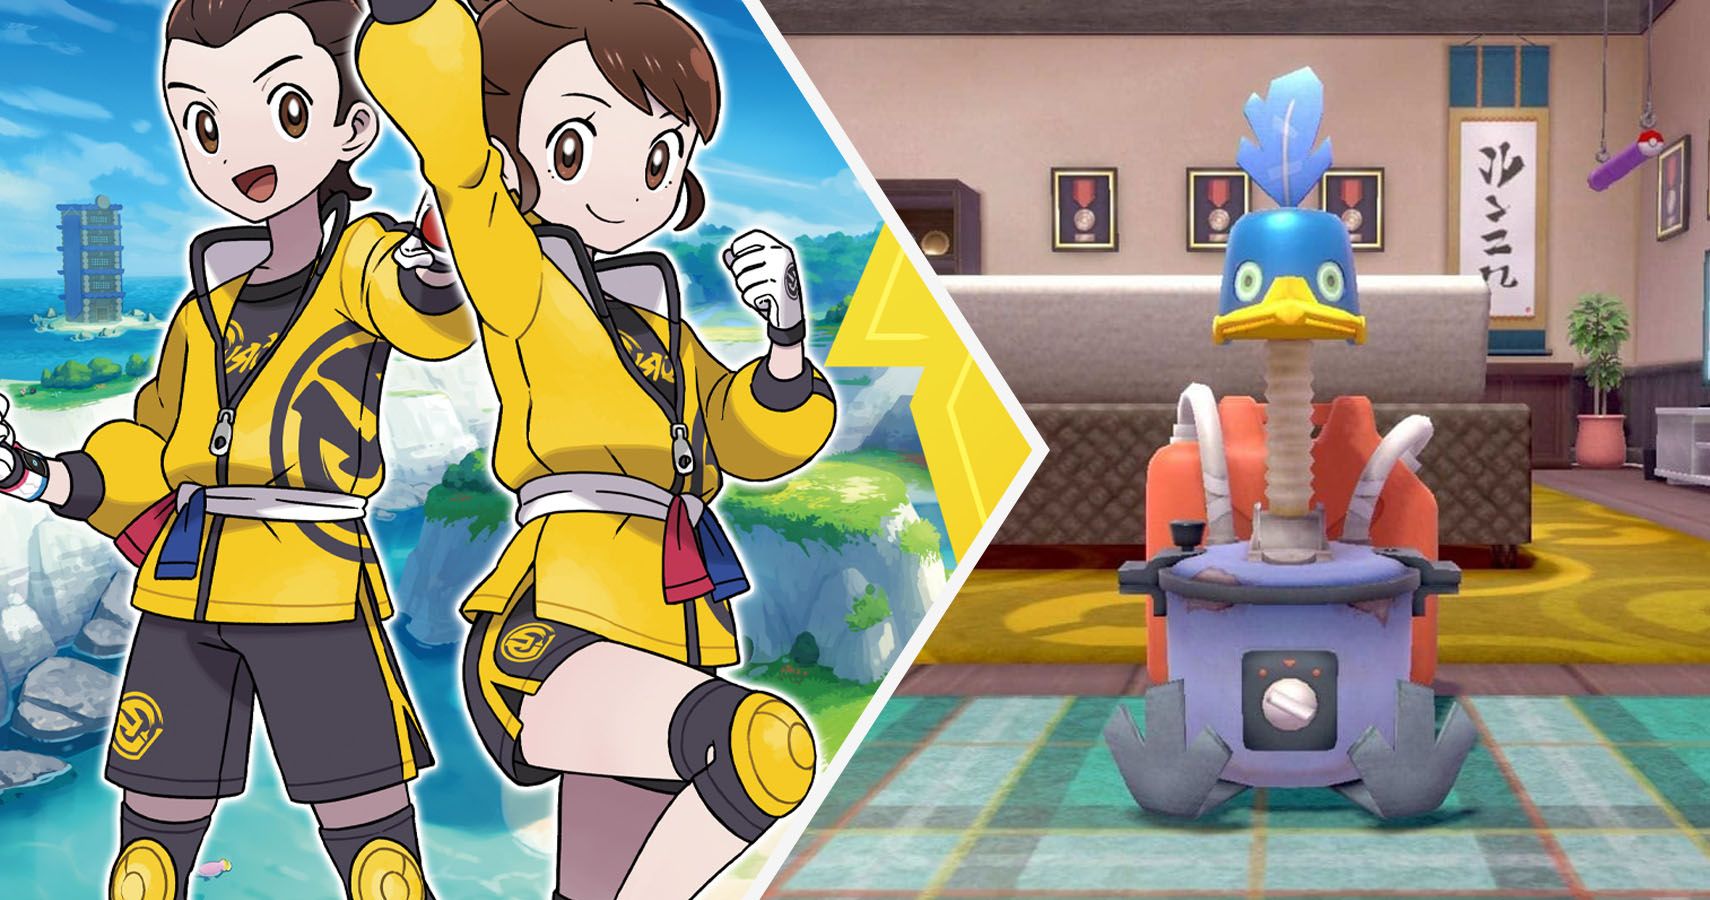 Pokémon Sword & Shield: The Isle Of Armor: A Guide To Find Every